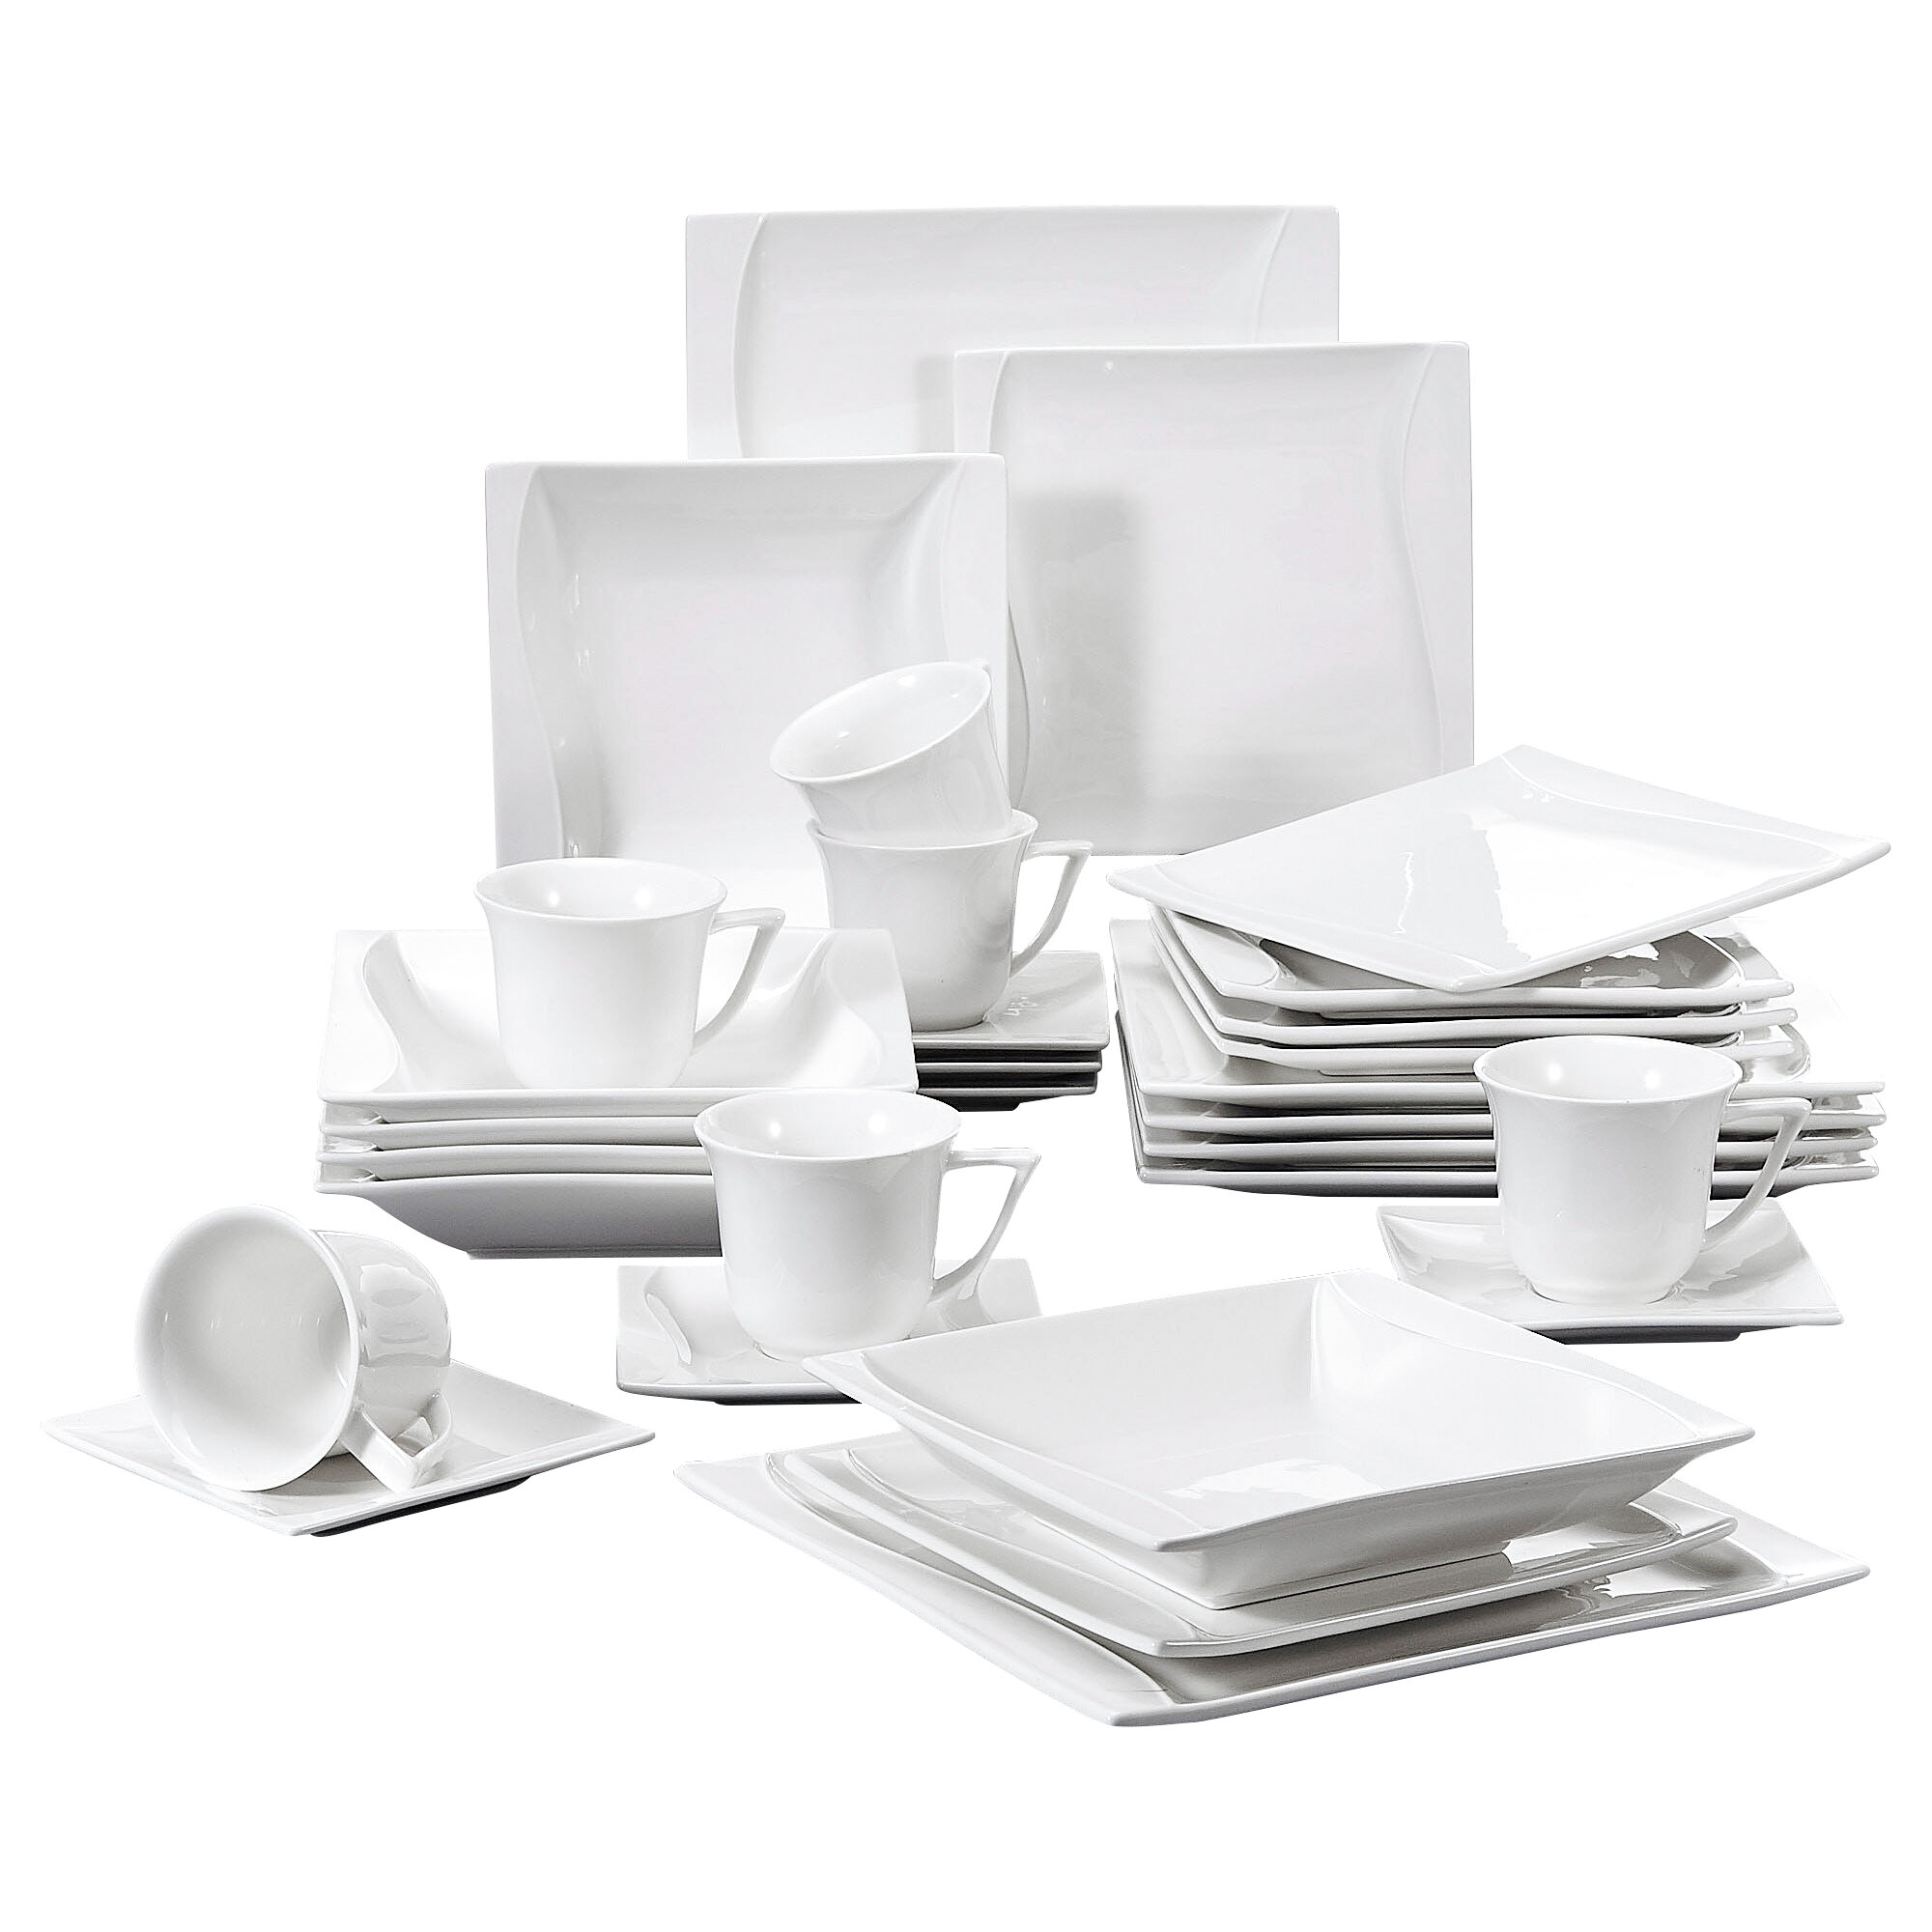 30Pc Dinner Set Crockery Dining Service for 6 Plates Bowls Cup Saucer Dinnerware 